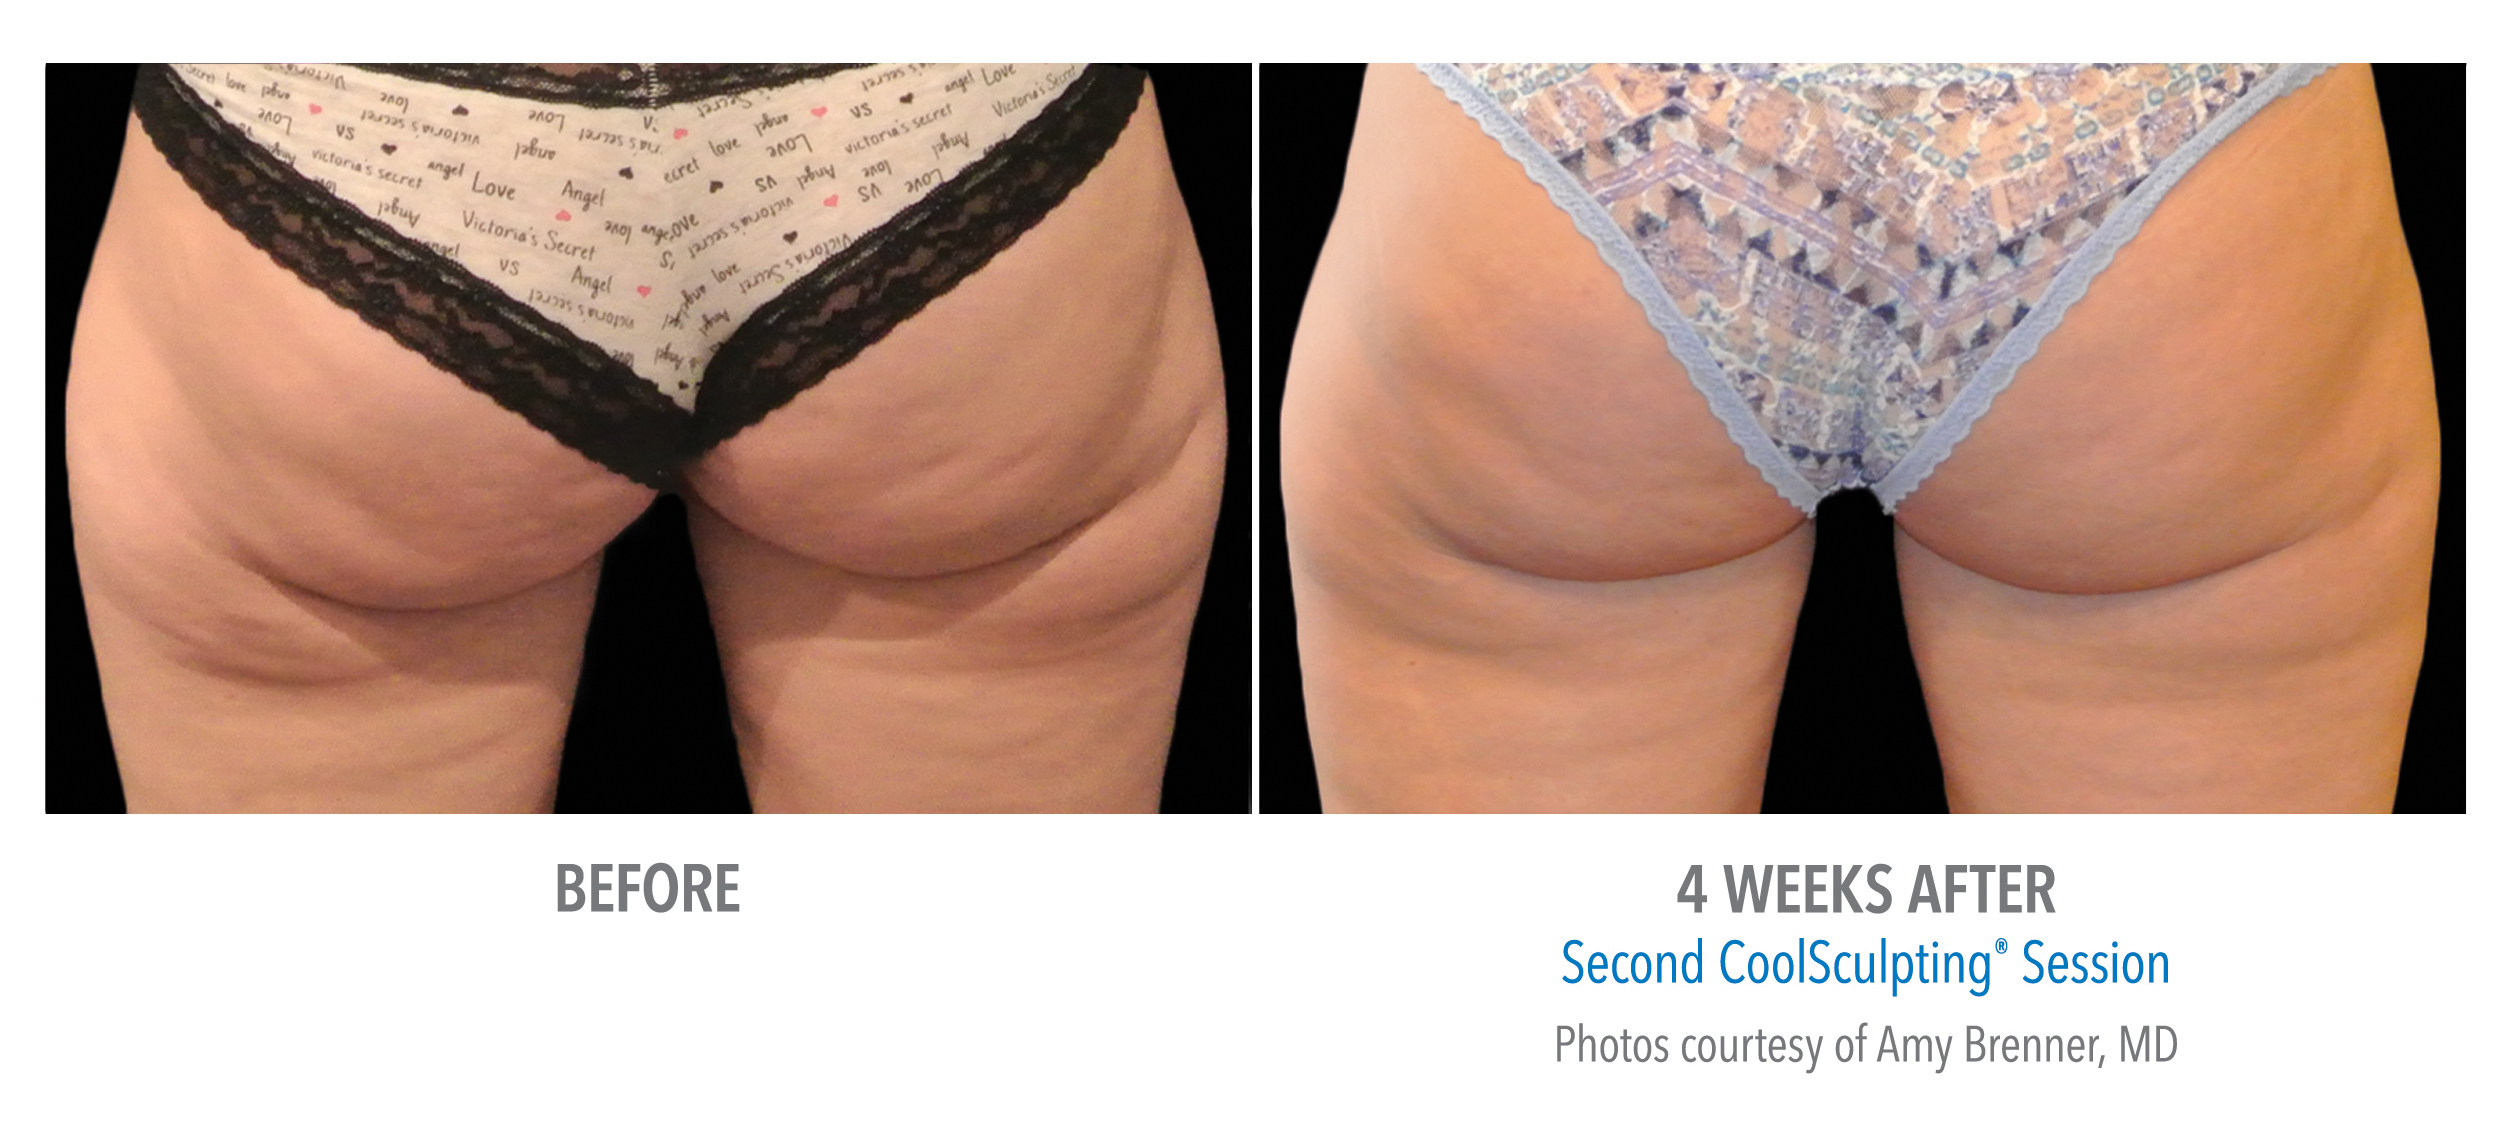 CoolSculpting Before & After Photos | Buttocks and Banana Rolls 1